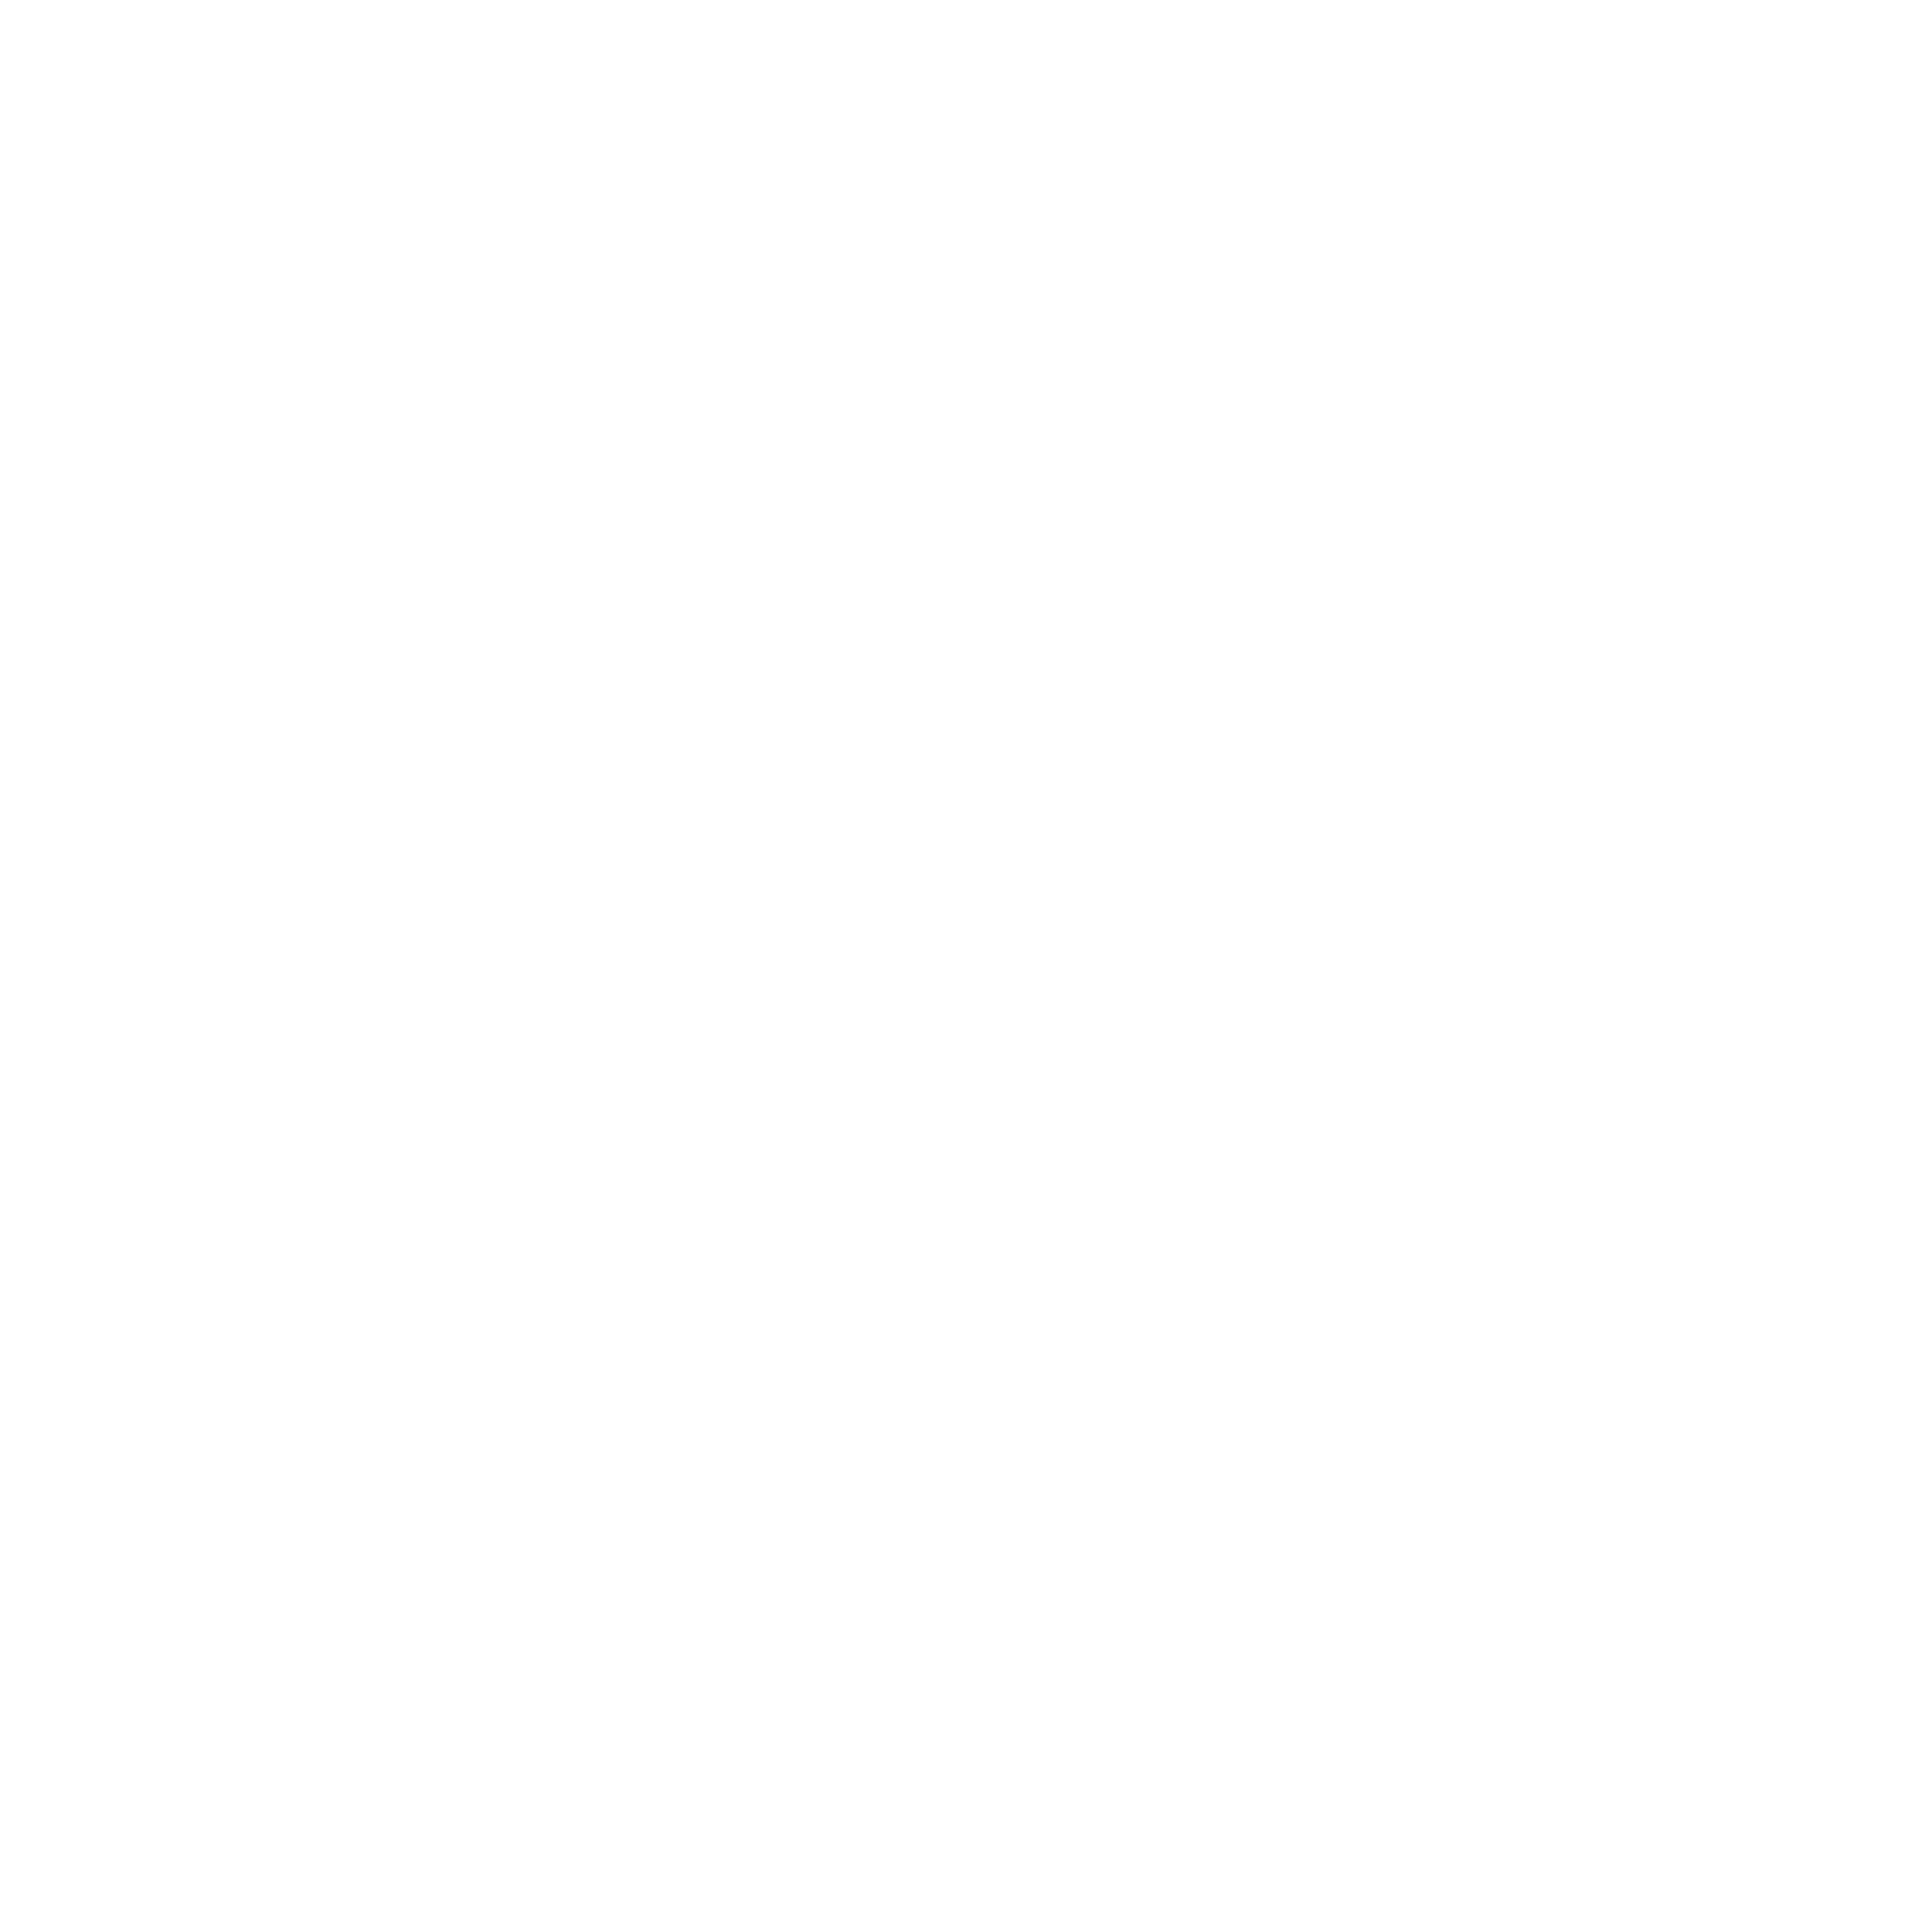 Huntercoin Cryptocurrency icon